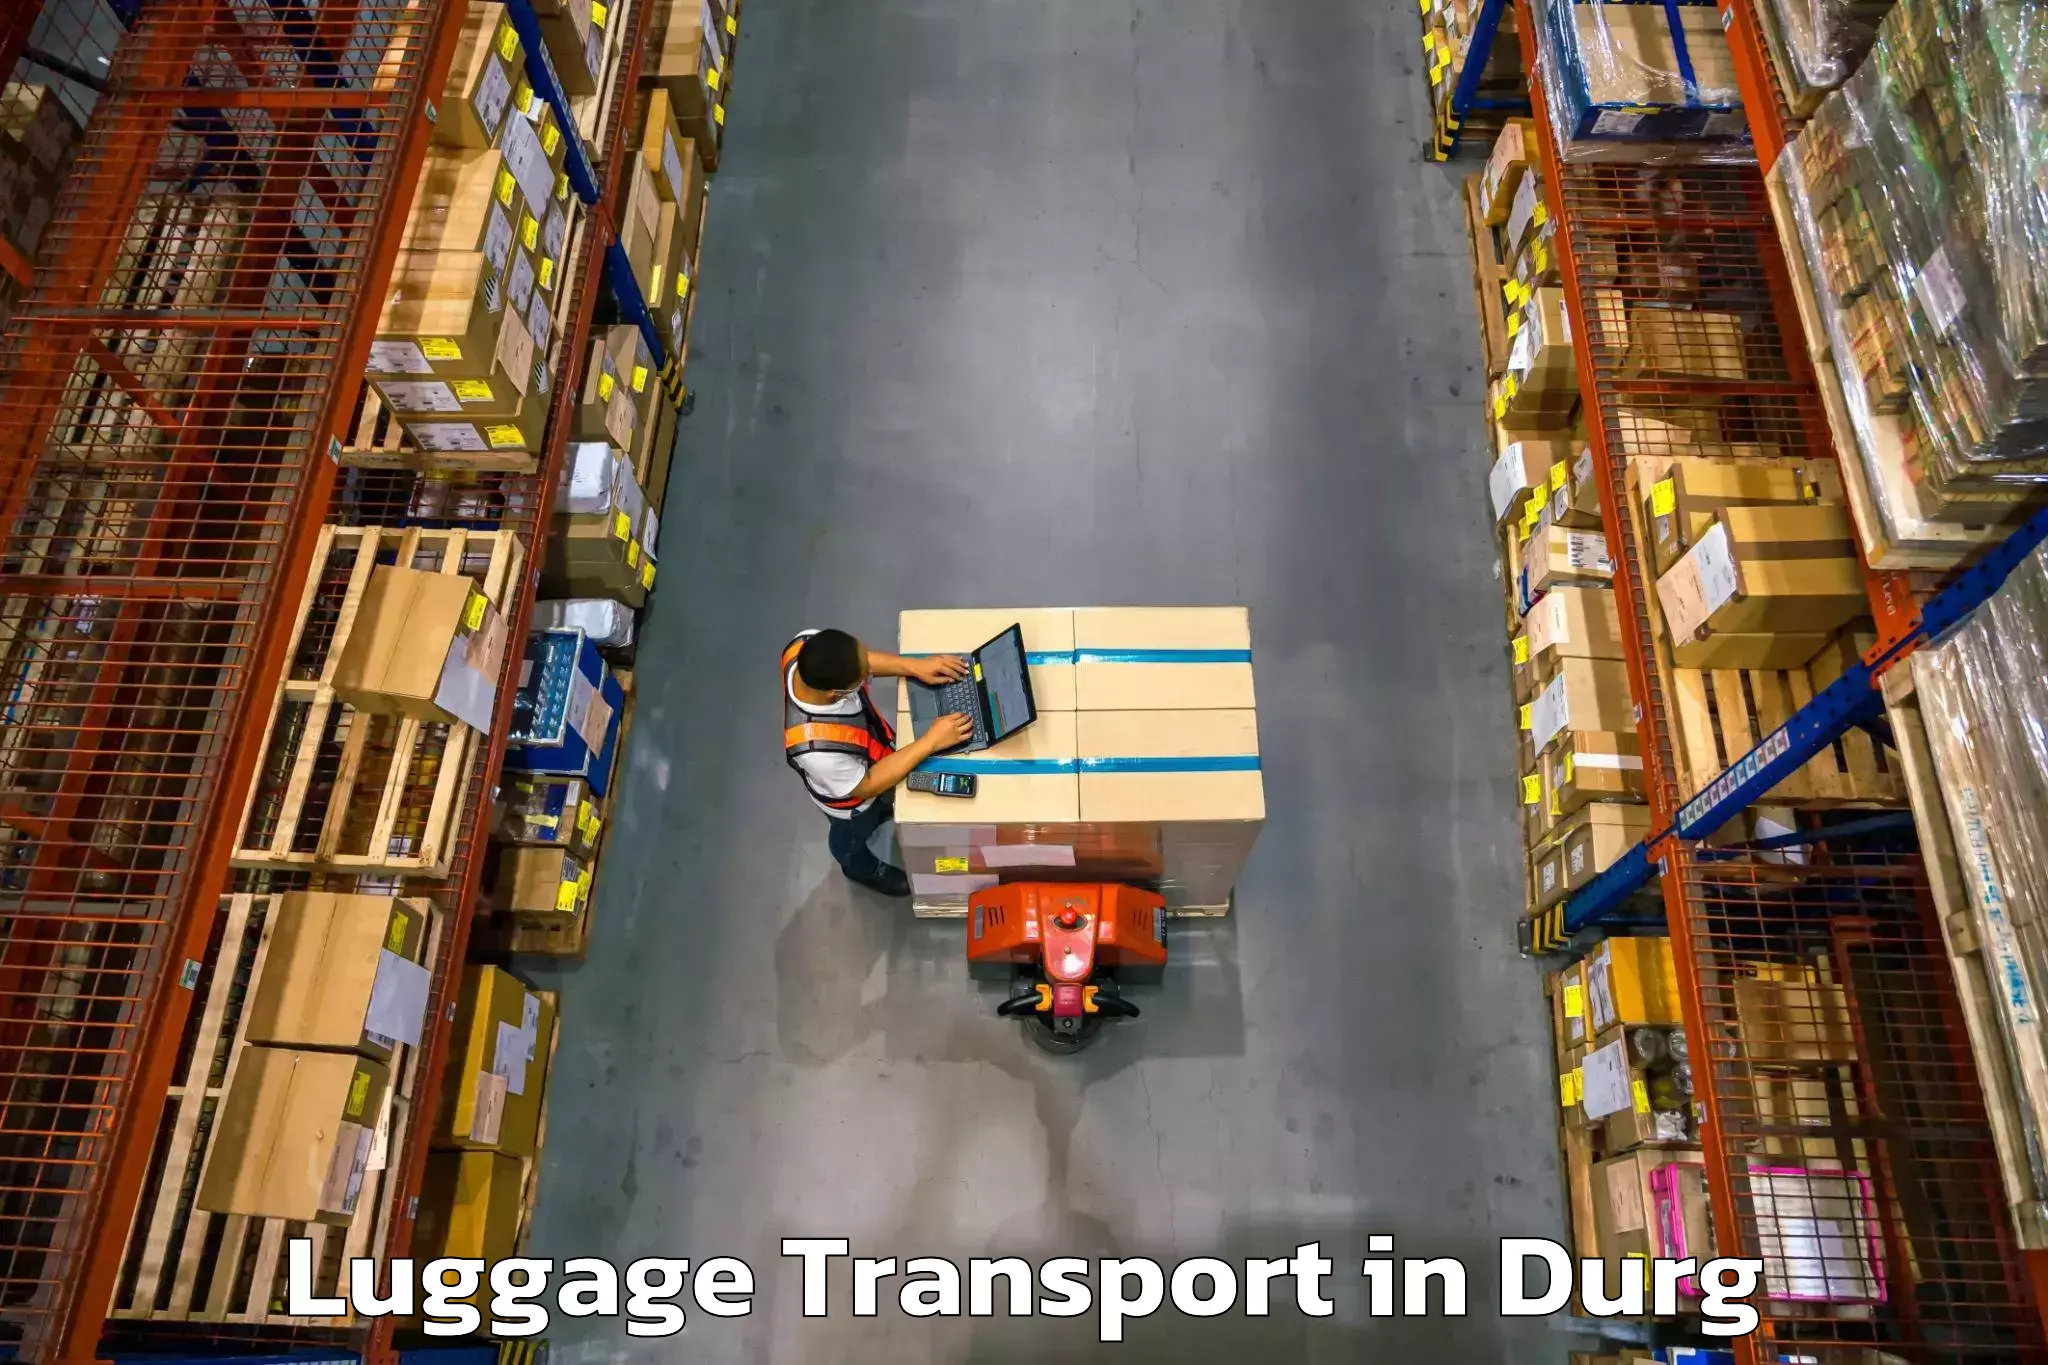 Domestic luggage transport in Durg